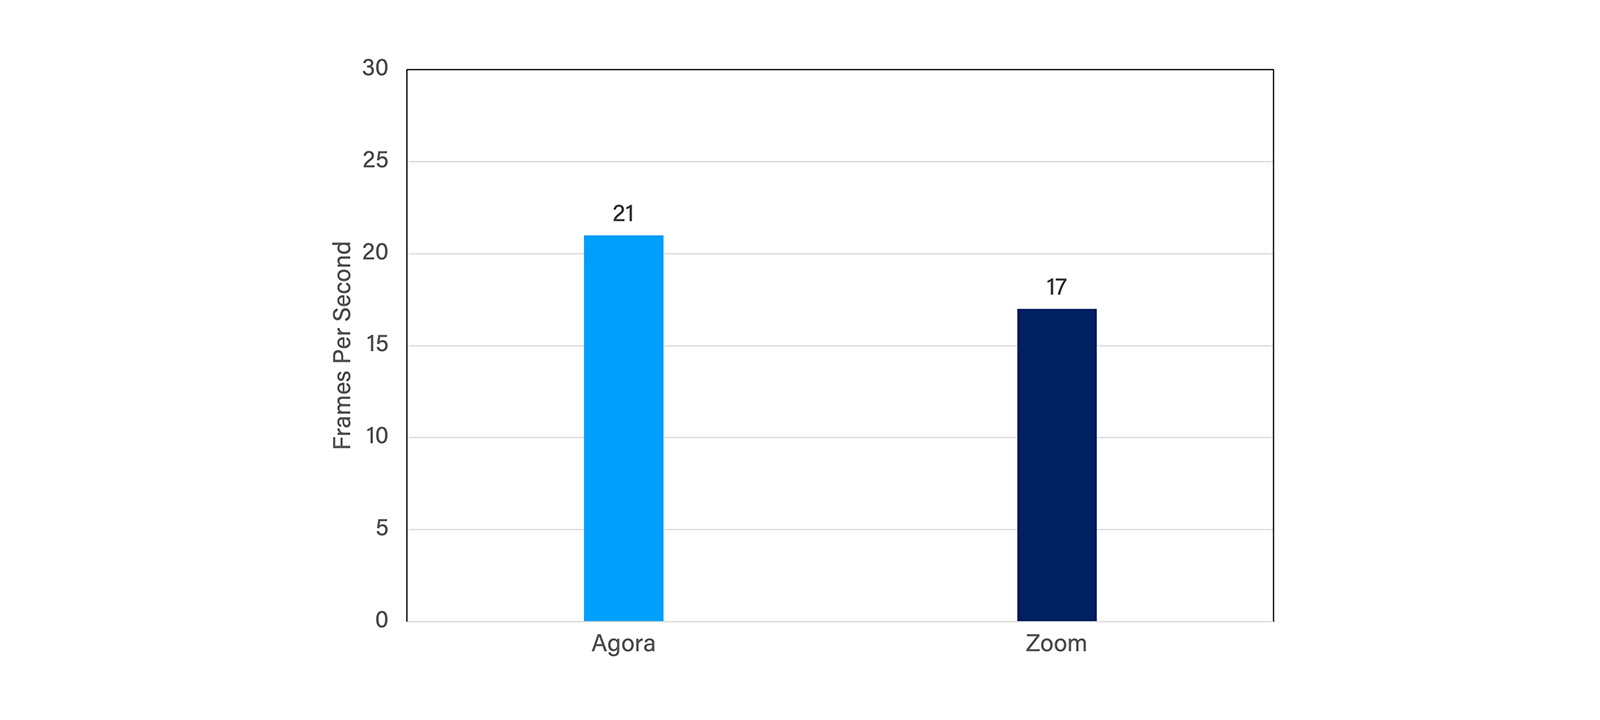 Figure 2: FPS comparison for Agora and Zoom with network having uplink packet loss of 25%.